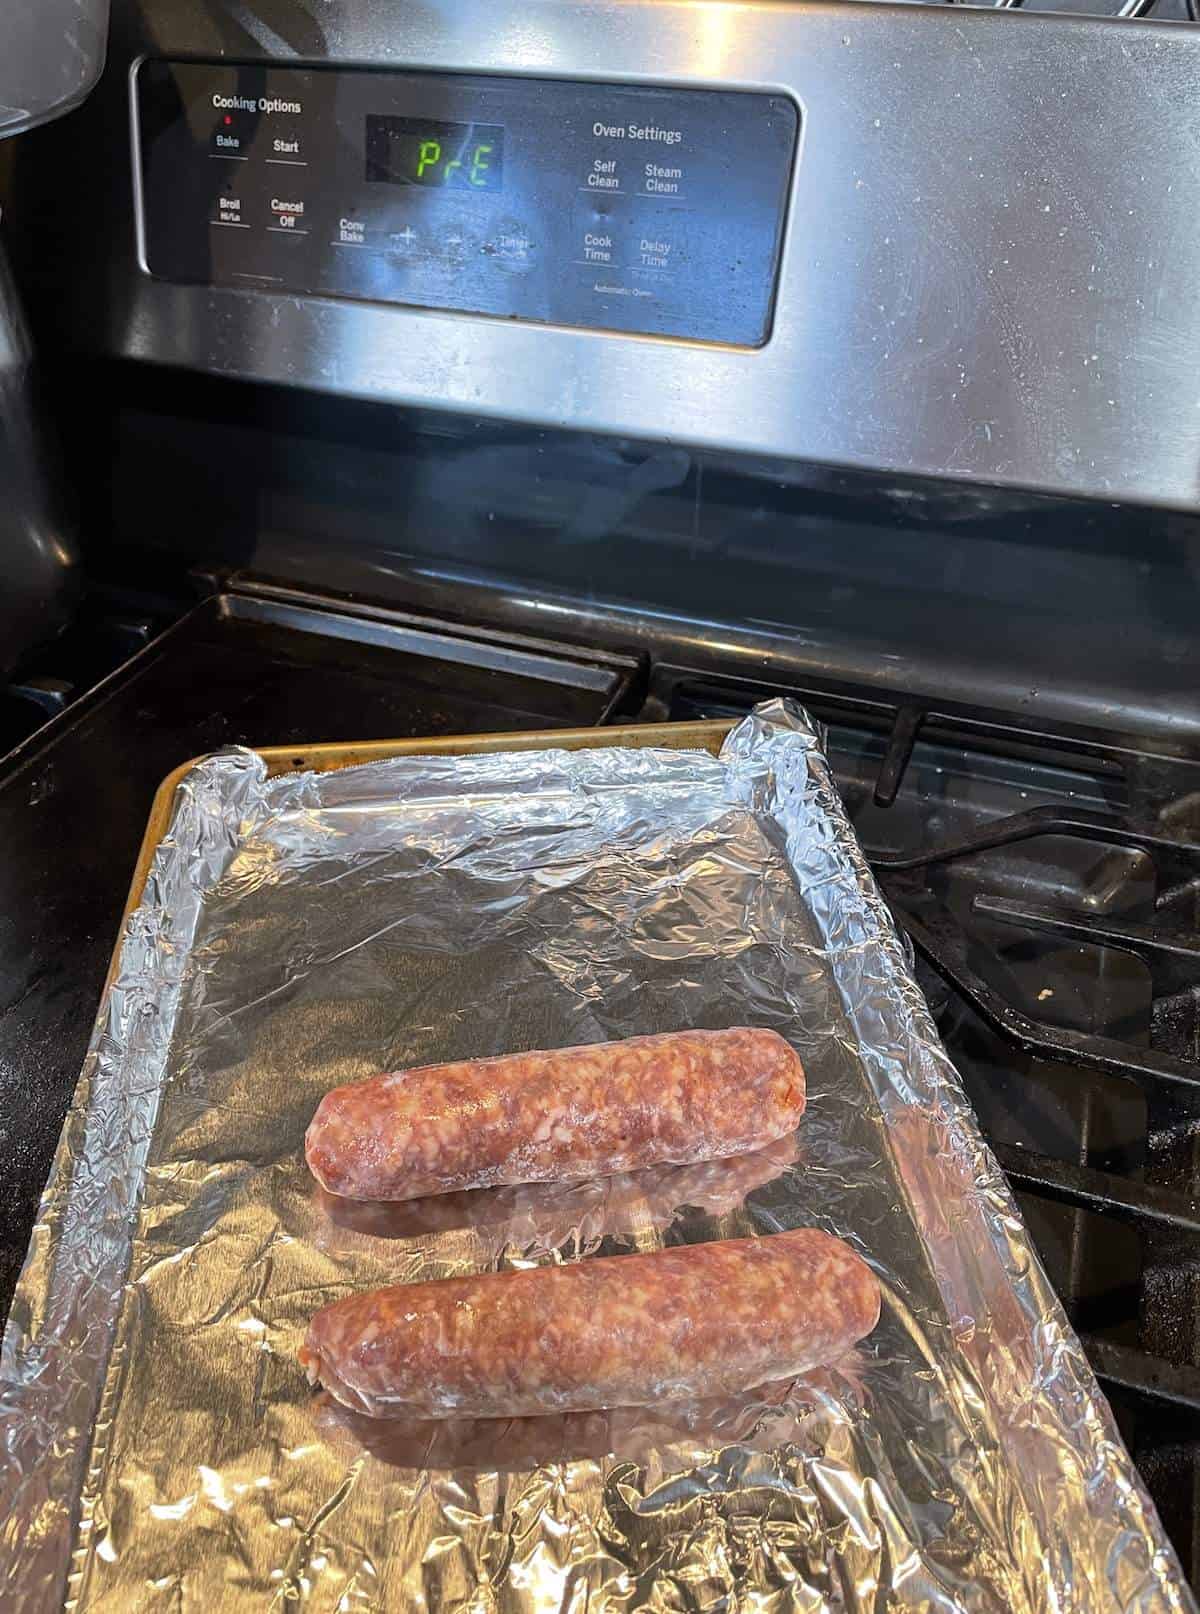 Two uncooked Italian sausages with an oven preheating in the background.